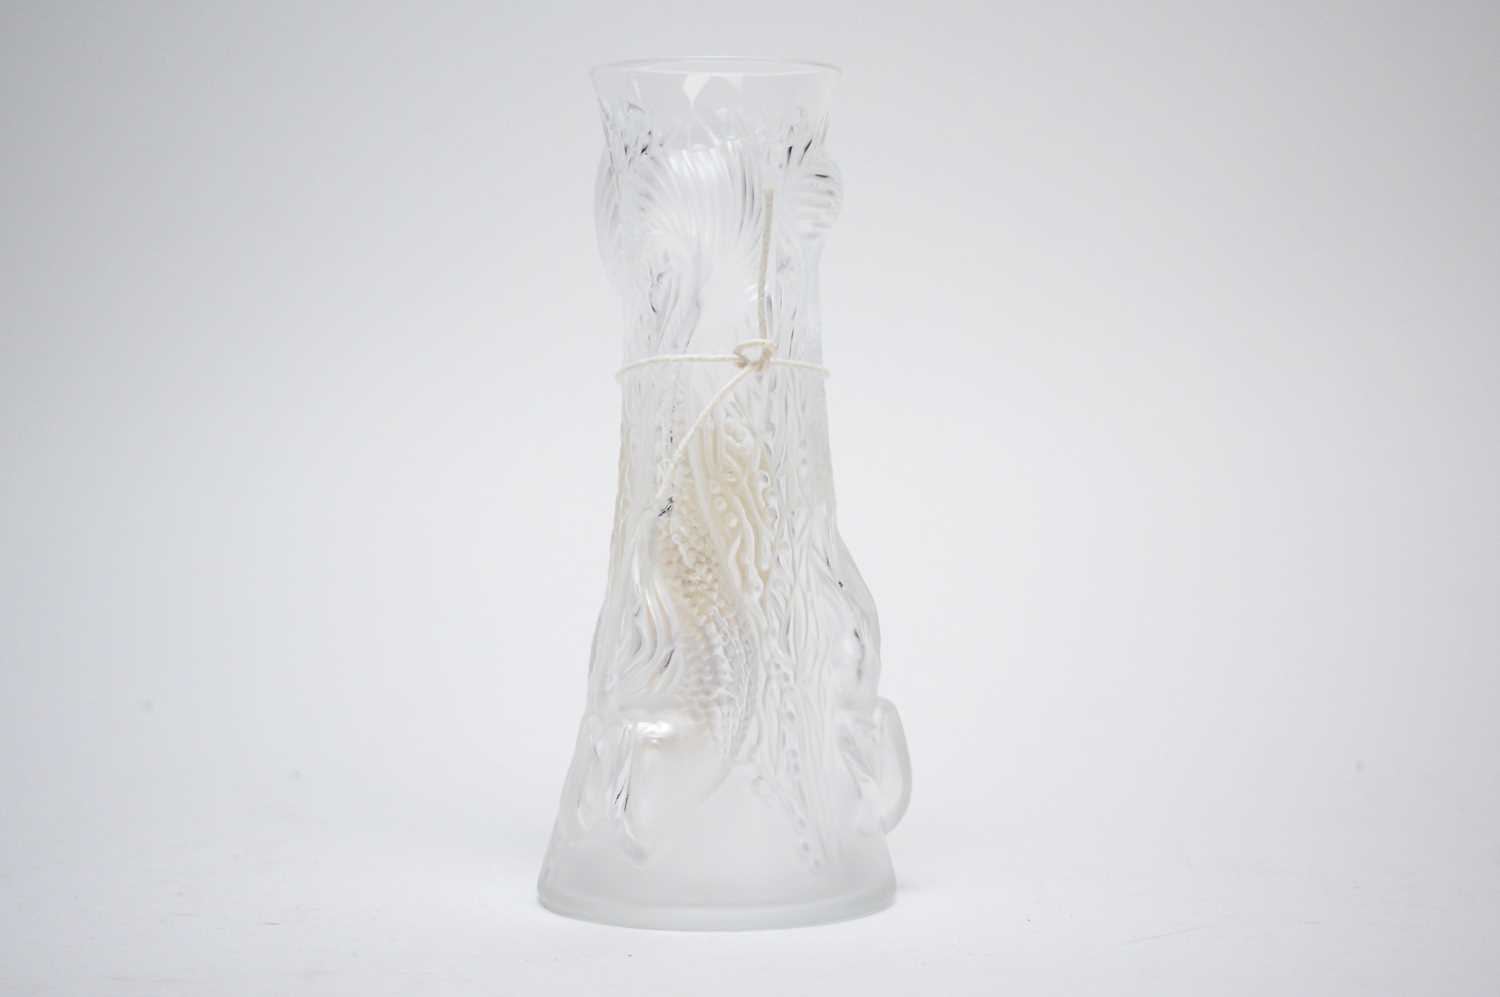 Lot 461 - A Lalique Siren pattern vase, moulded with sirens or mermaids